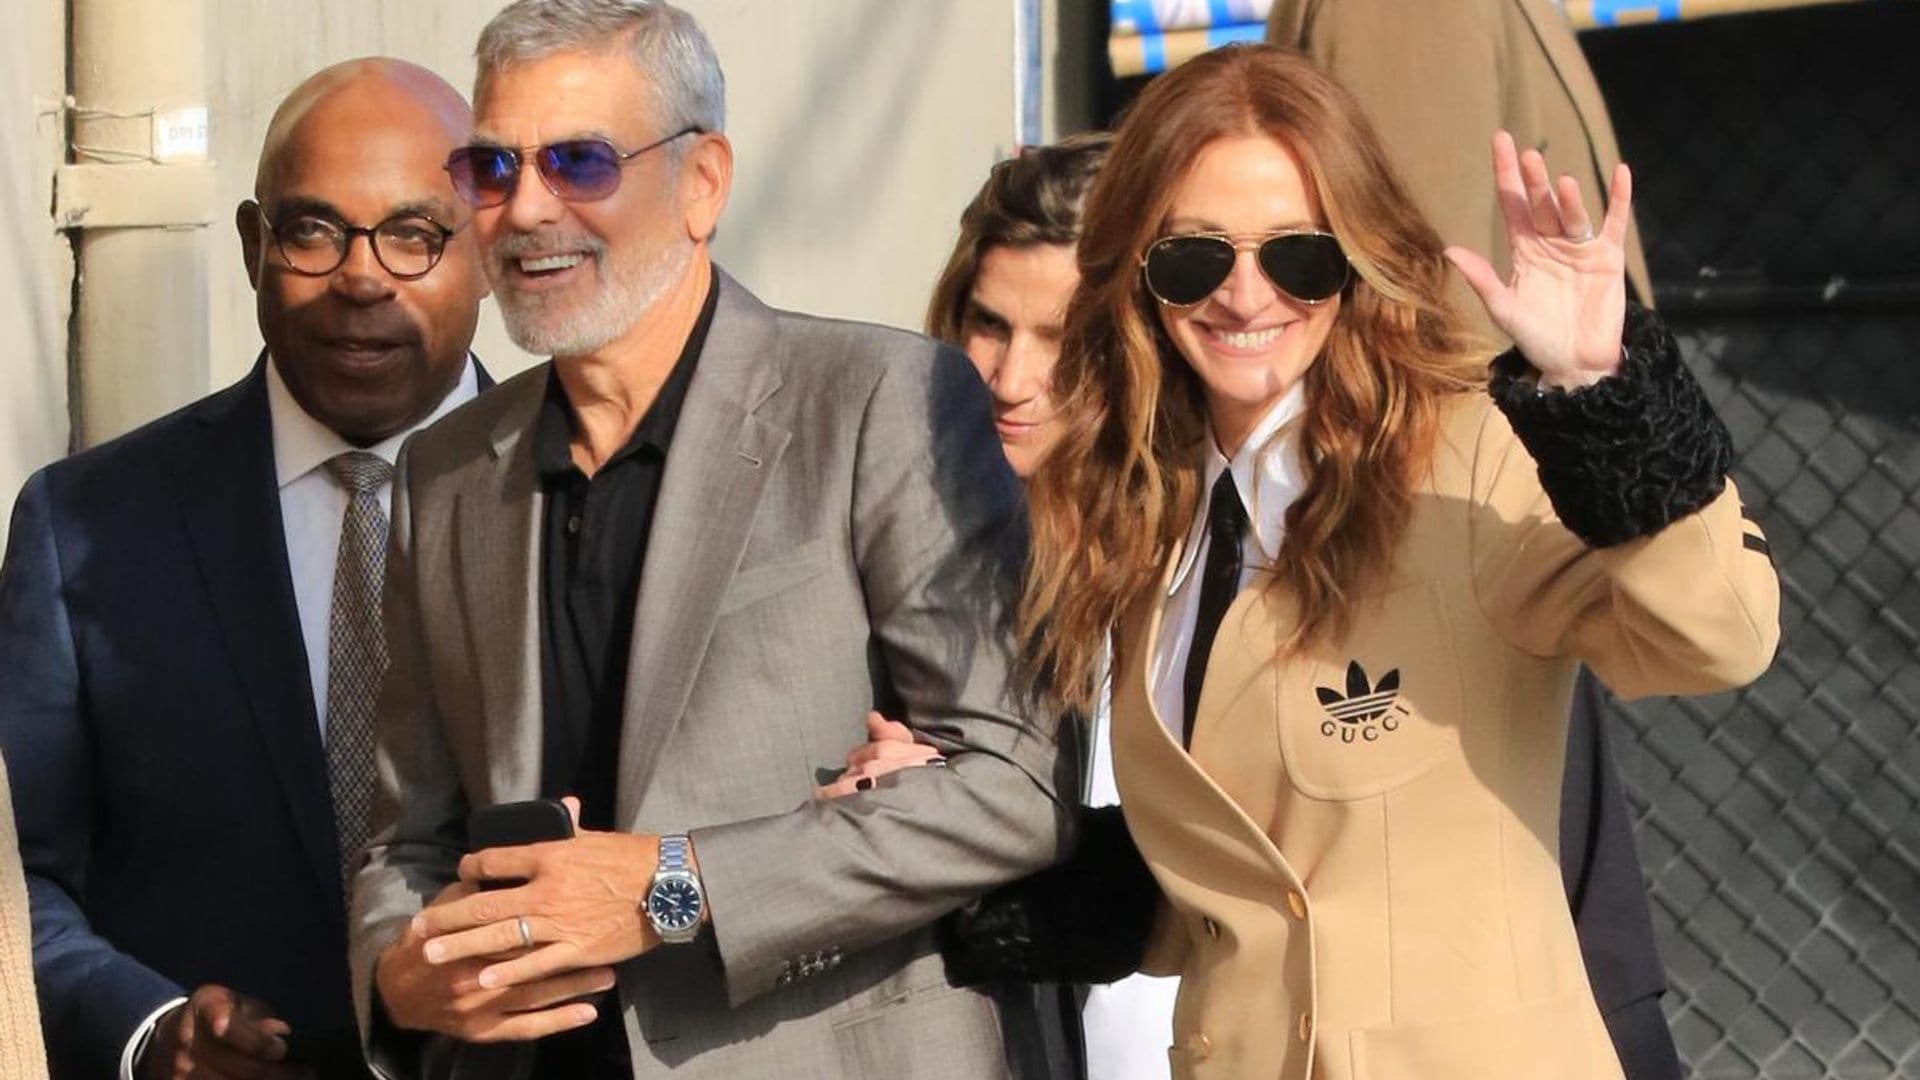 Julia Roberts looks stunning with a Gucci x Adidas suit